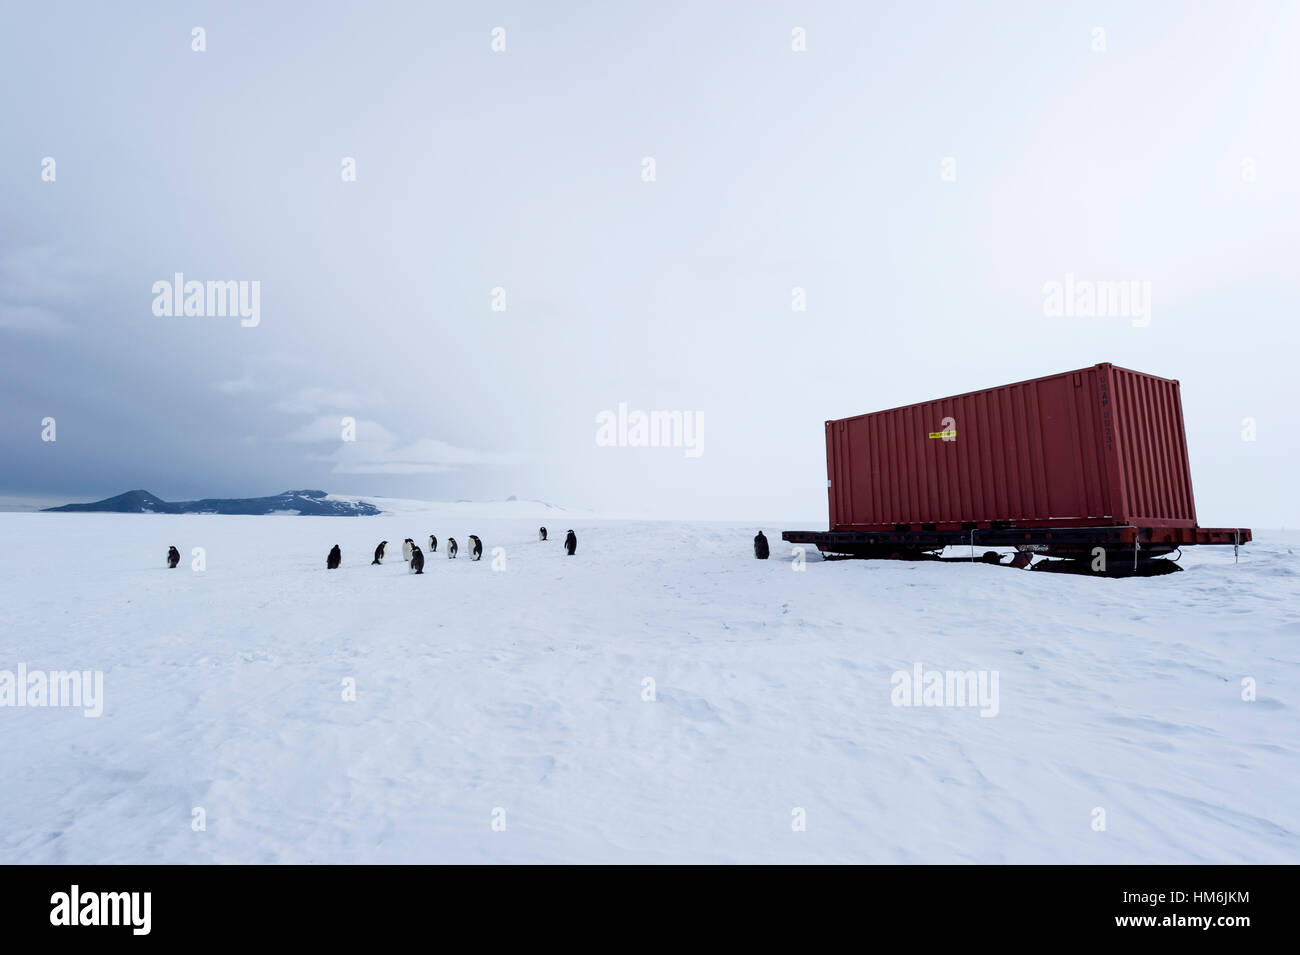 Emperor Penguins gather near a shipping container on the sea ice. Stock Photo